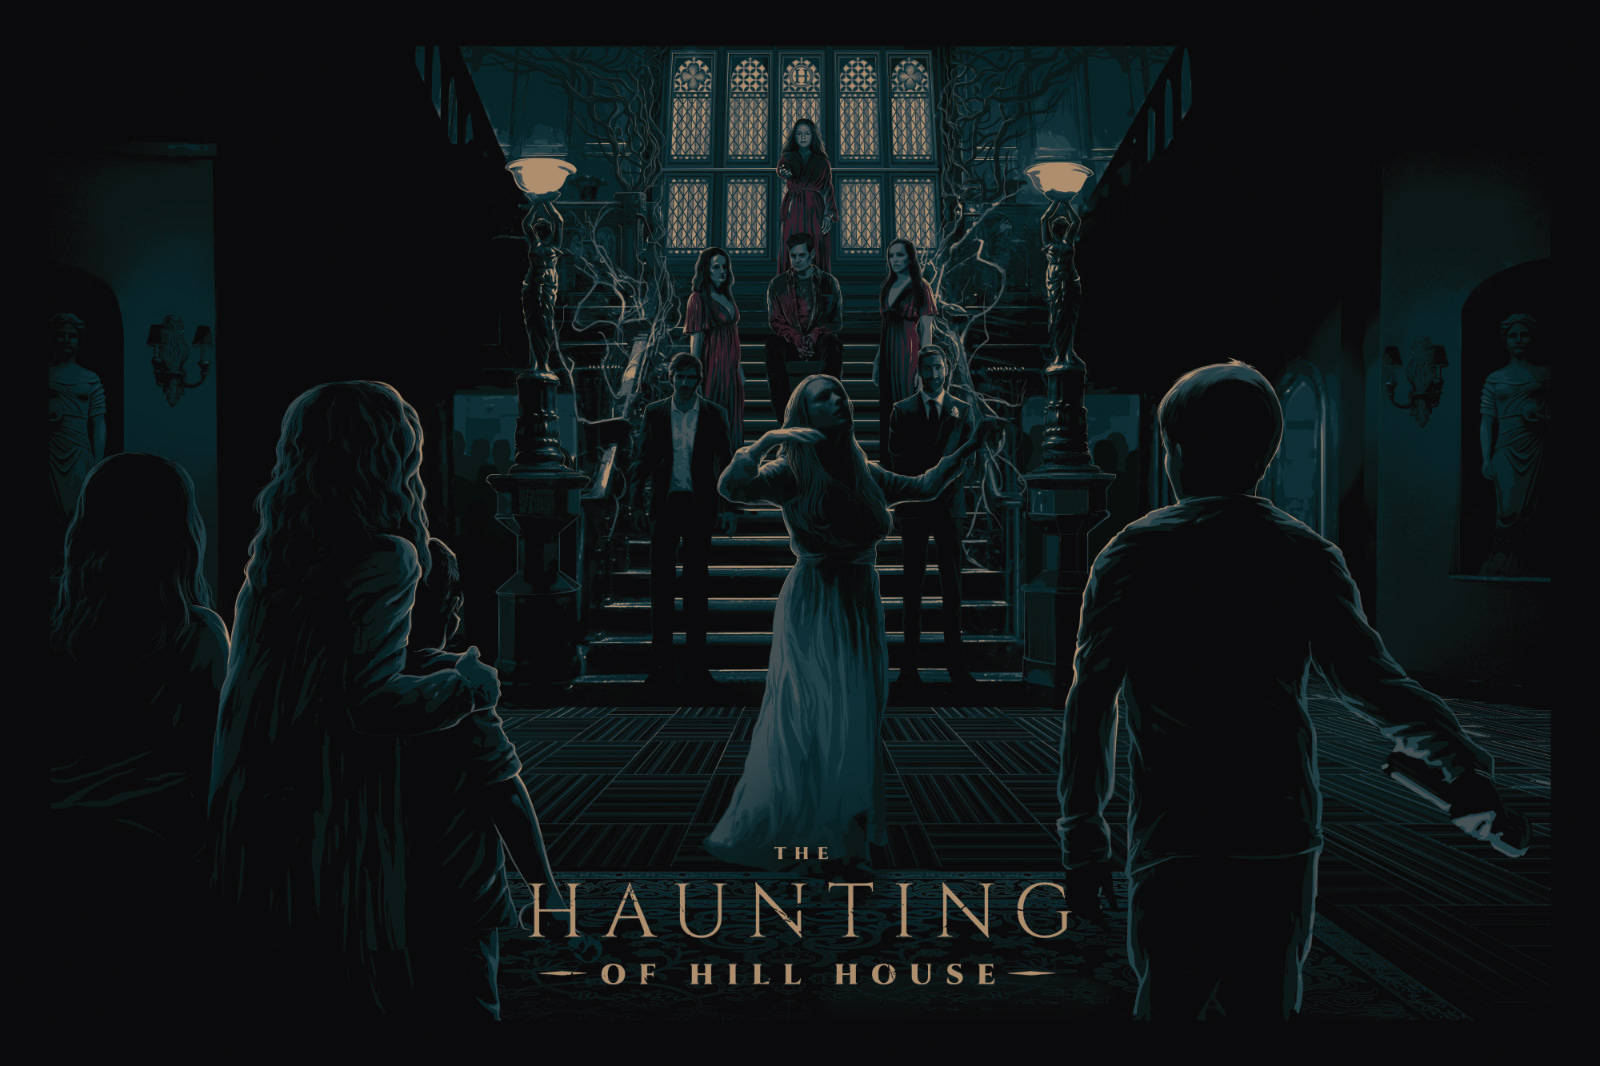 The Haunting Of Hill House Digital Illustration Wallpaper